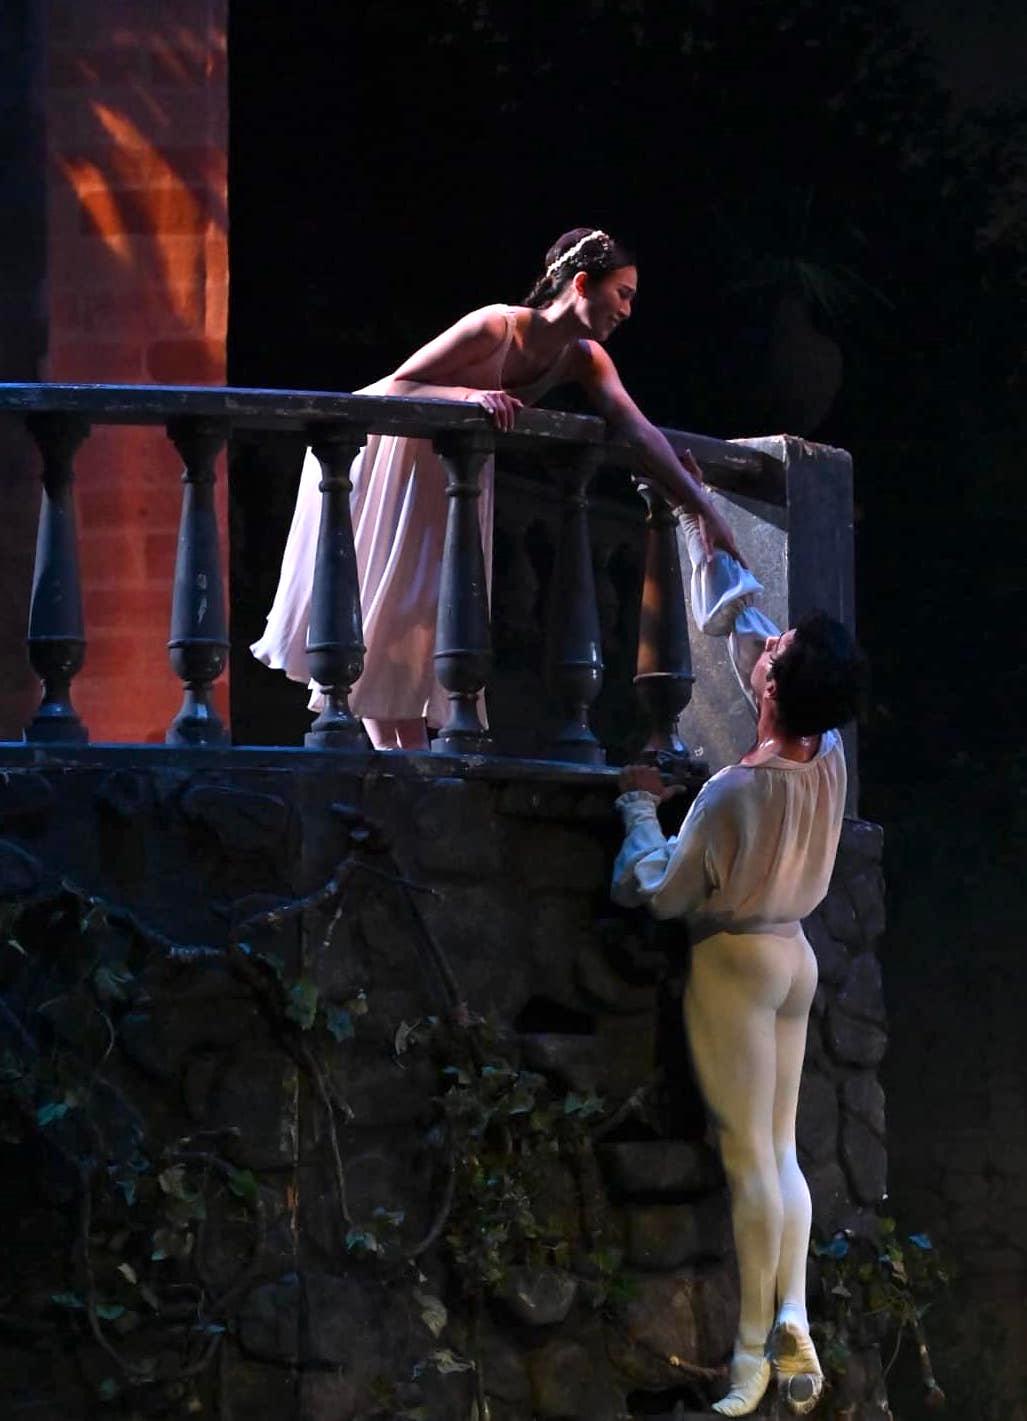 The ballet "Romeo and Juliet" was performed on May 6-7 at the California Center for the Arts, Escondido. (Courtesy of Anna Scipione/City Ballet of San Diego)